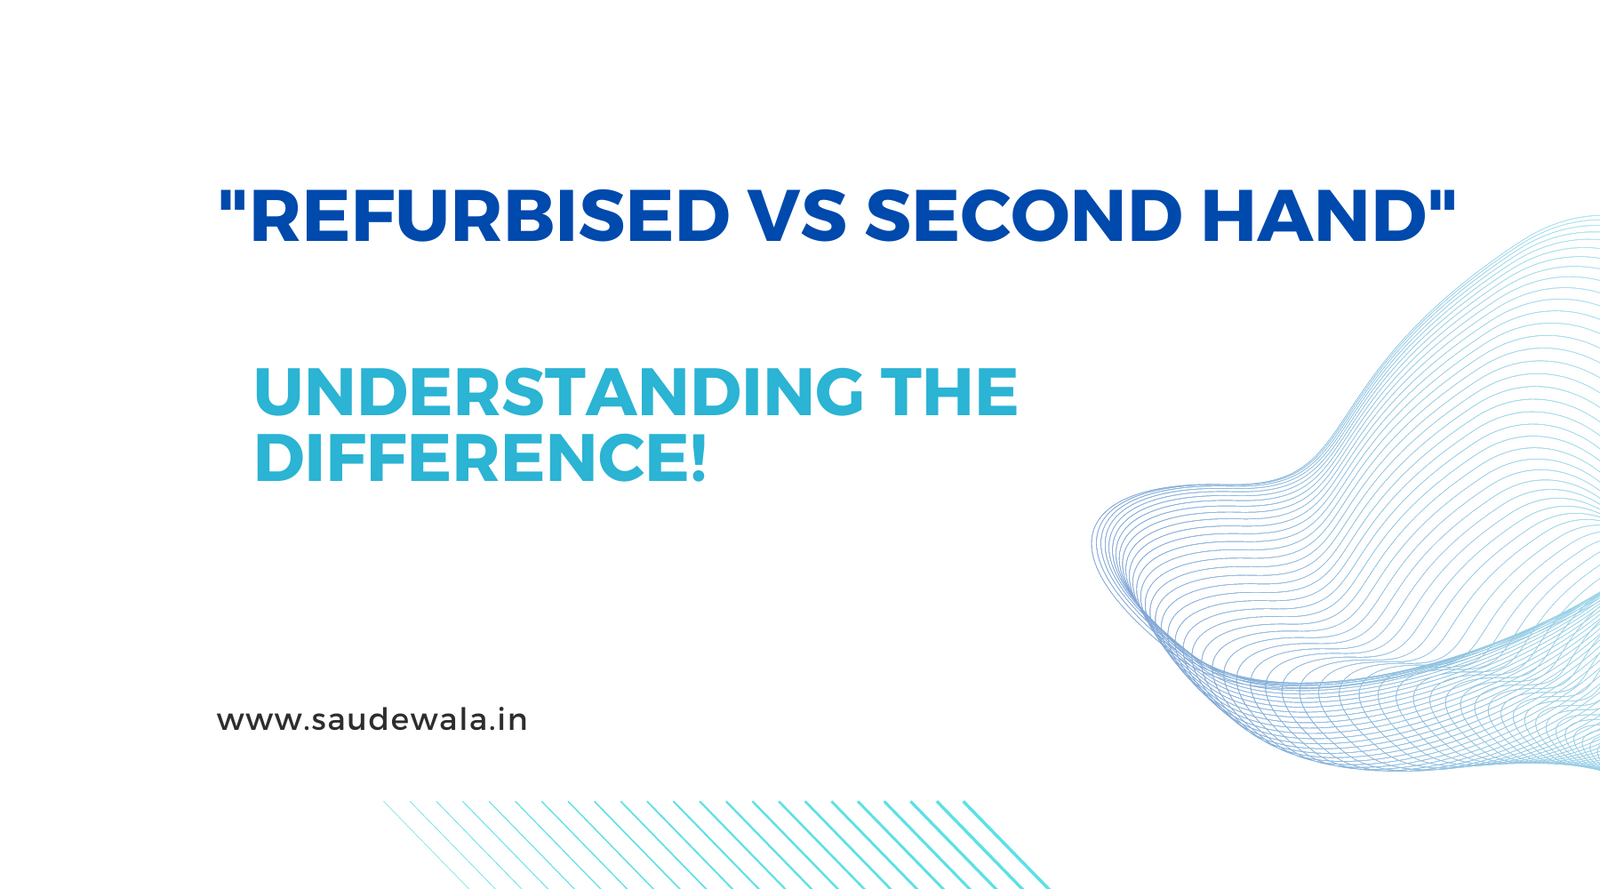 "Refurbished vs. Second-hand: Understanding the Difference"